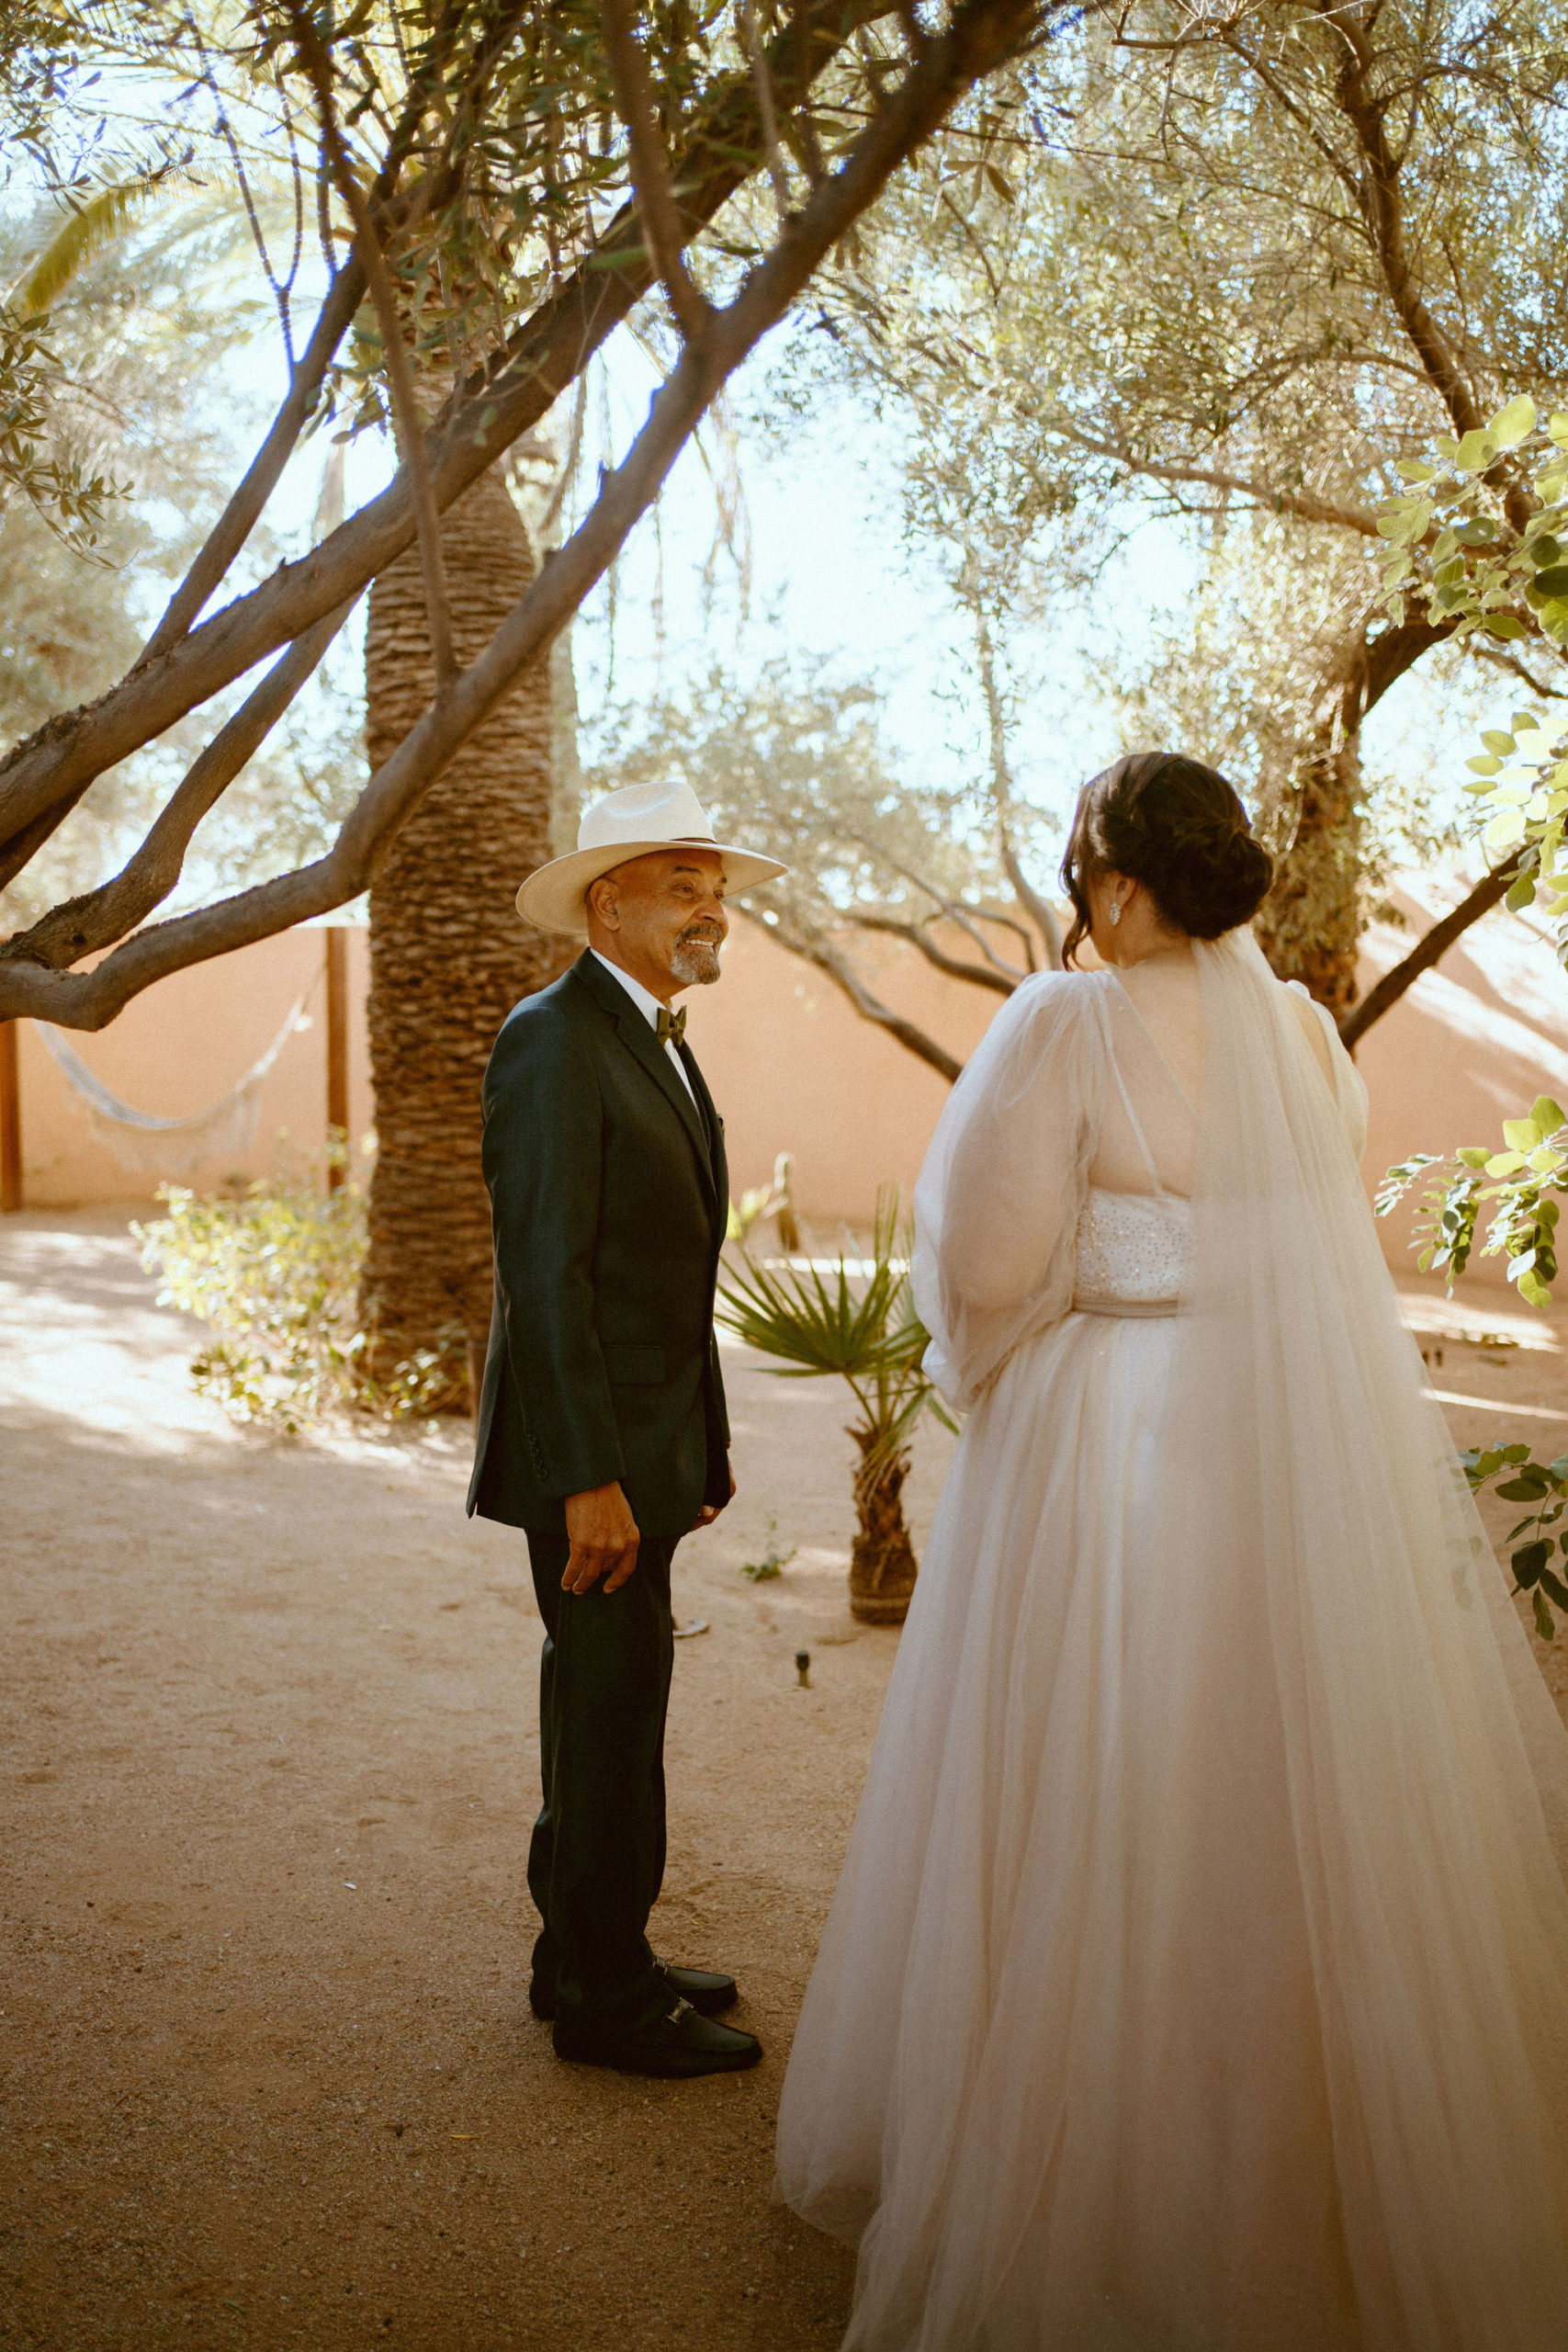 Saguaro National Park Micro-Wedding. The father of the bride smiling as he turns to see the bride all dressed up